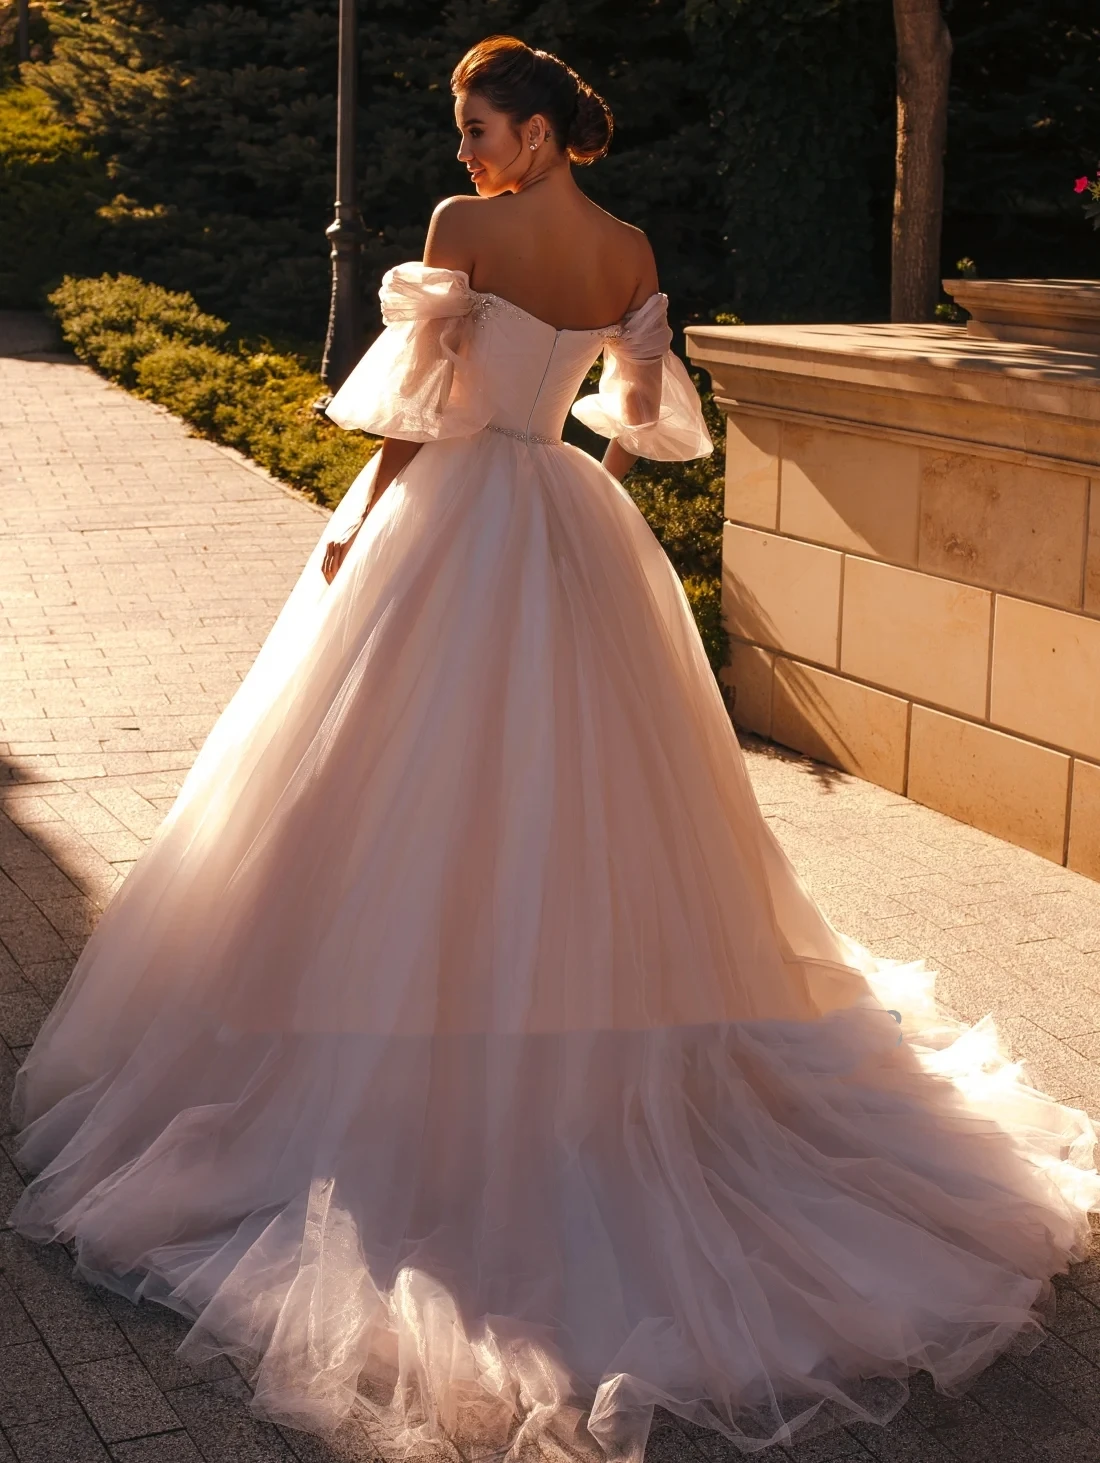 A Maggie Sottero Gown for a 1940's and 1950's Hollywood Glamour Inspired  Wedding | Love My Dress®, UK Wedding Blog, Podcast, Directory & Shop